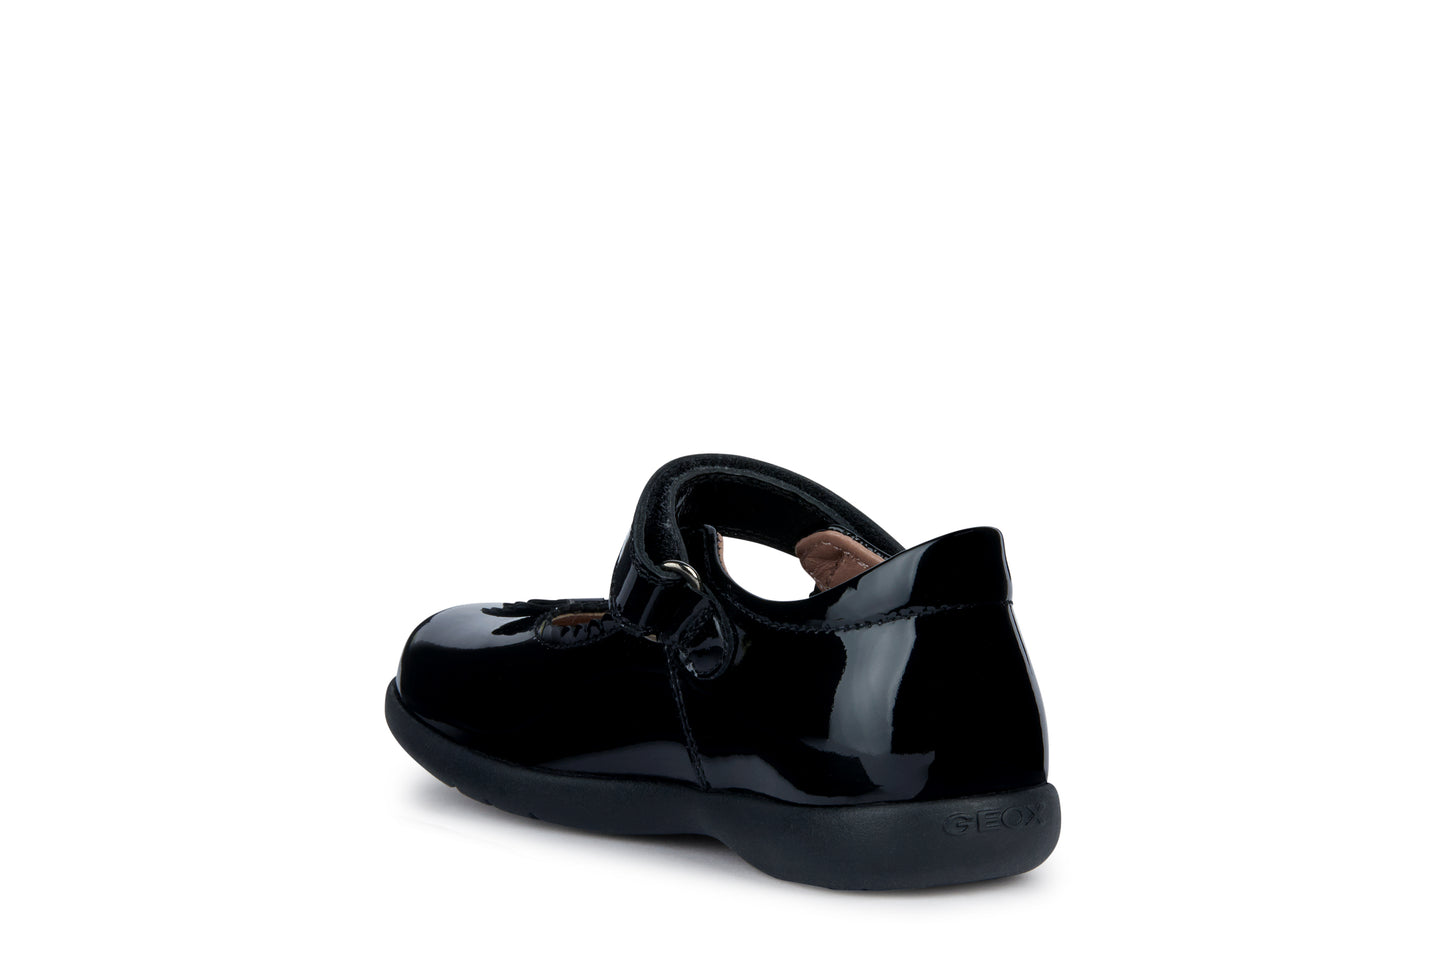 A girls school shoe by Geox, style Naimara in black patent with a velcro strap. Rear inner side view.